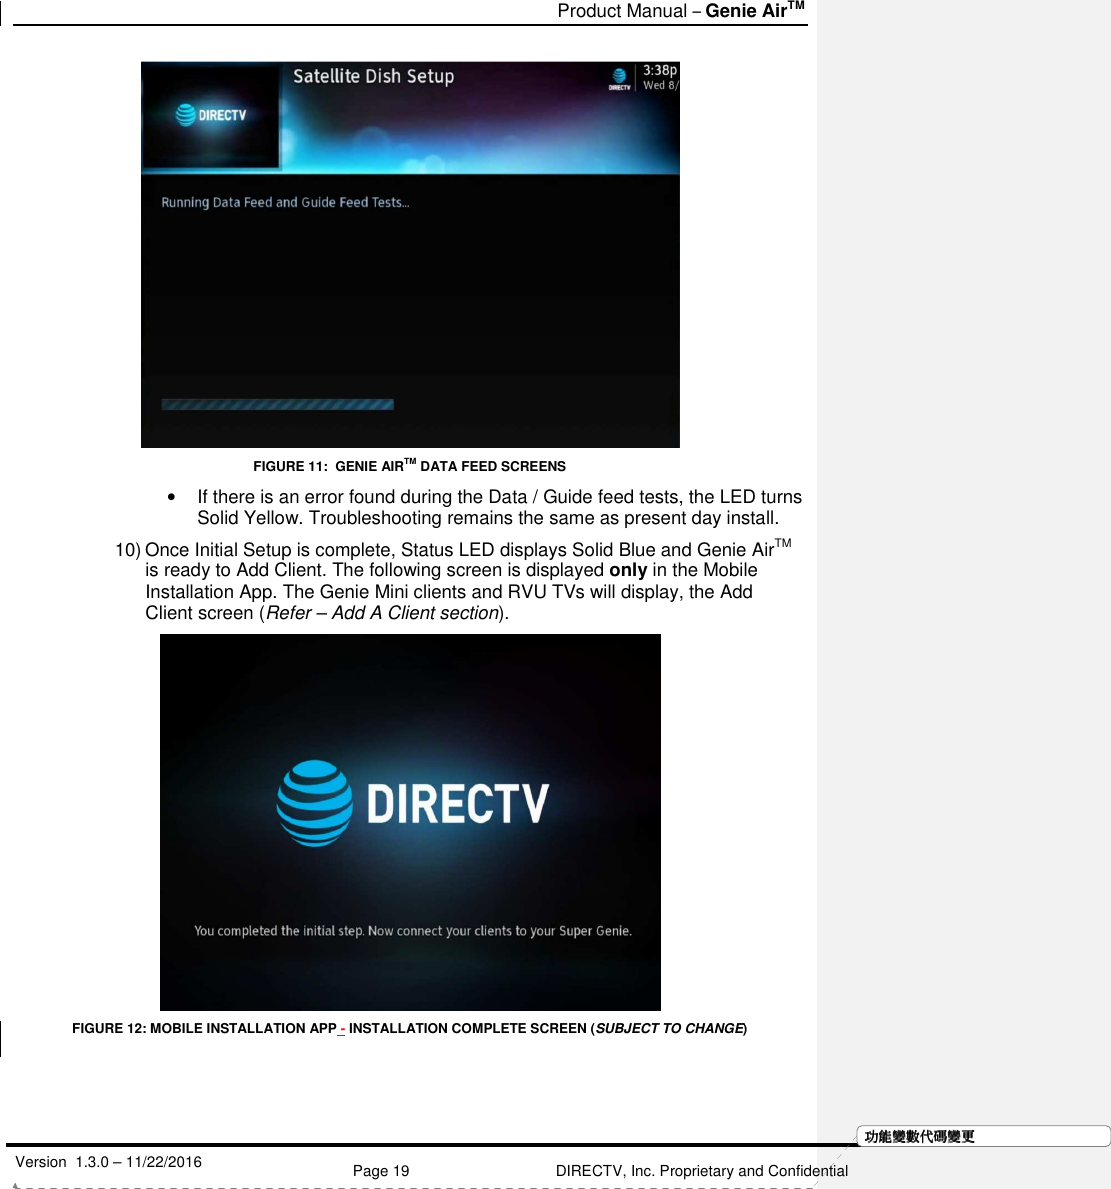   Product Manual – Genie AirTM   Version  1.3.0 – 11/22/2016    Page 19 DIRECTV, Inc. Proprietary and Confidential  功功功功能變能變能變能變數代數代數代數代碼變碼變碼變碼變更更更更 FIGURE 11:  GENIE AIRTM DATA FEED SCREENS •  If there is an error found during the Data / Guide feed tests, the LED turns Solid Yellow. Troubleshooting remains the same as present day install. 10) Once Initial Setup is complete, Status LED displays Solid Blue and Genie AirTM is ready to Add Client. The following screen is displayed only in the Mobile Installation App. The Genie Mini clients and RVU TVs will display, the Add Client screen (Refer – Add A Client section).  FIGURE 12: MOBILE INSTALLATION APP - INSTALLATION COMPLETE SCREEN (SUBJECT TO CHANGE)    